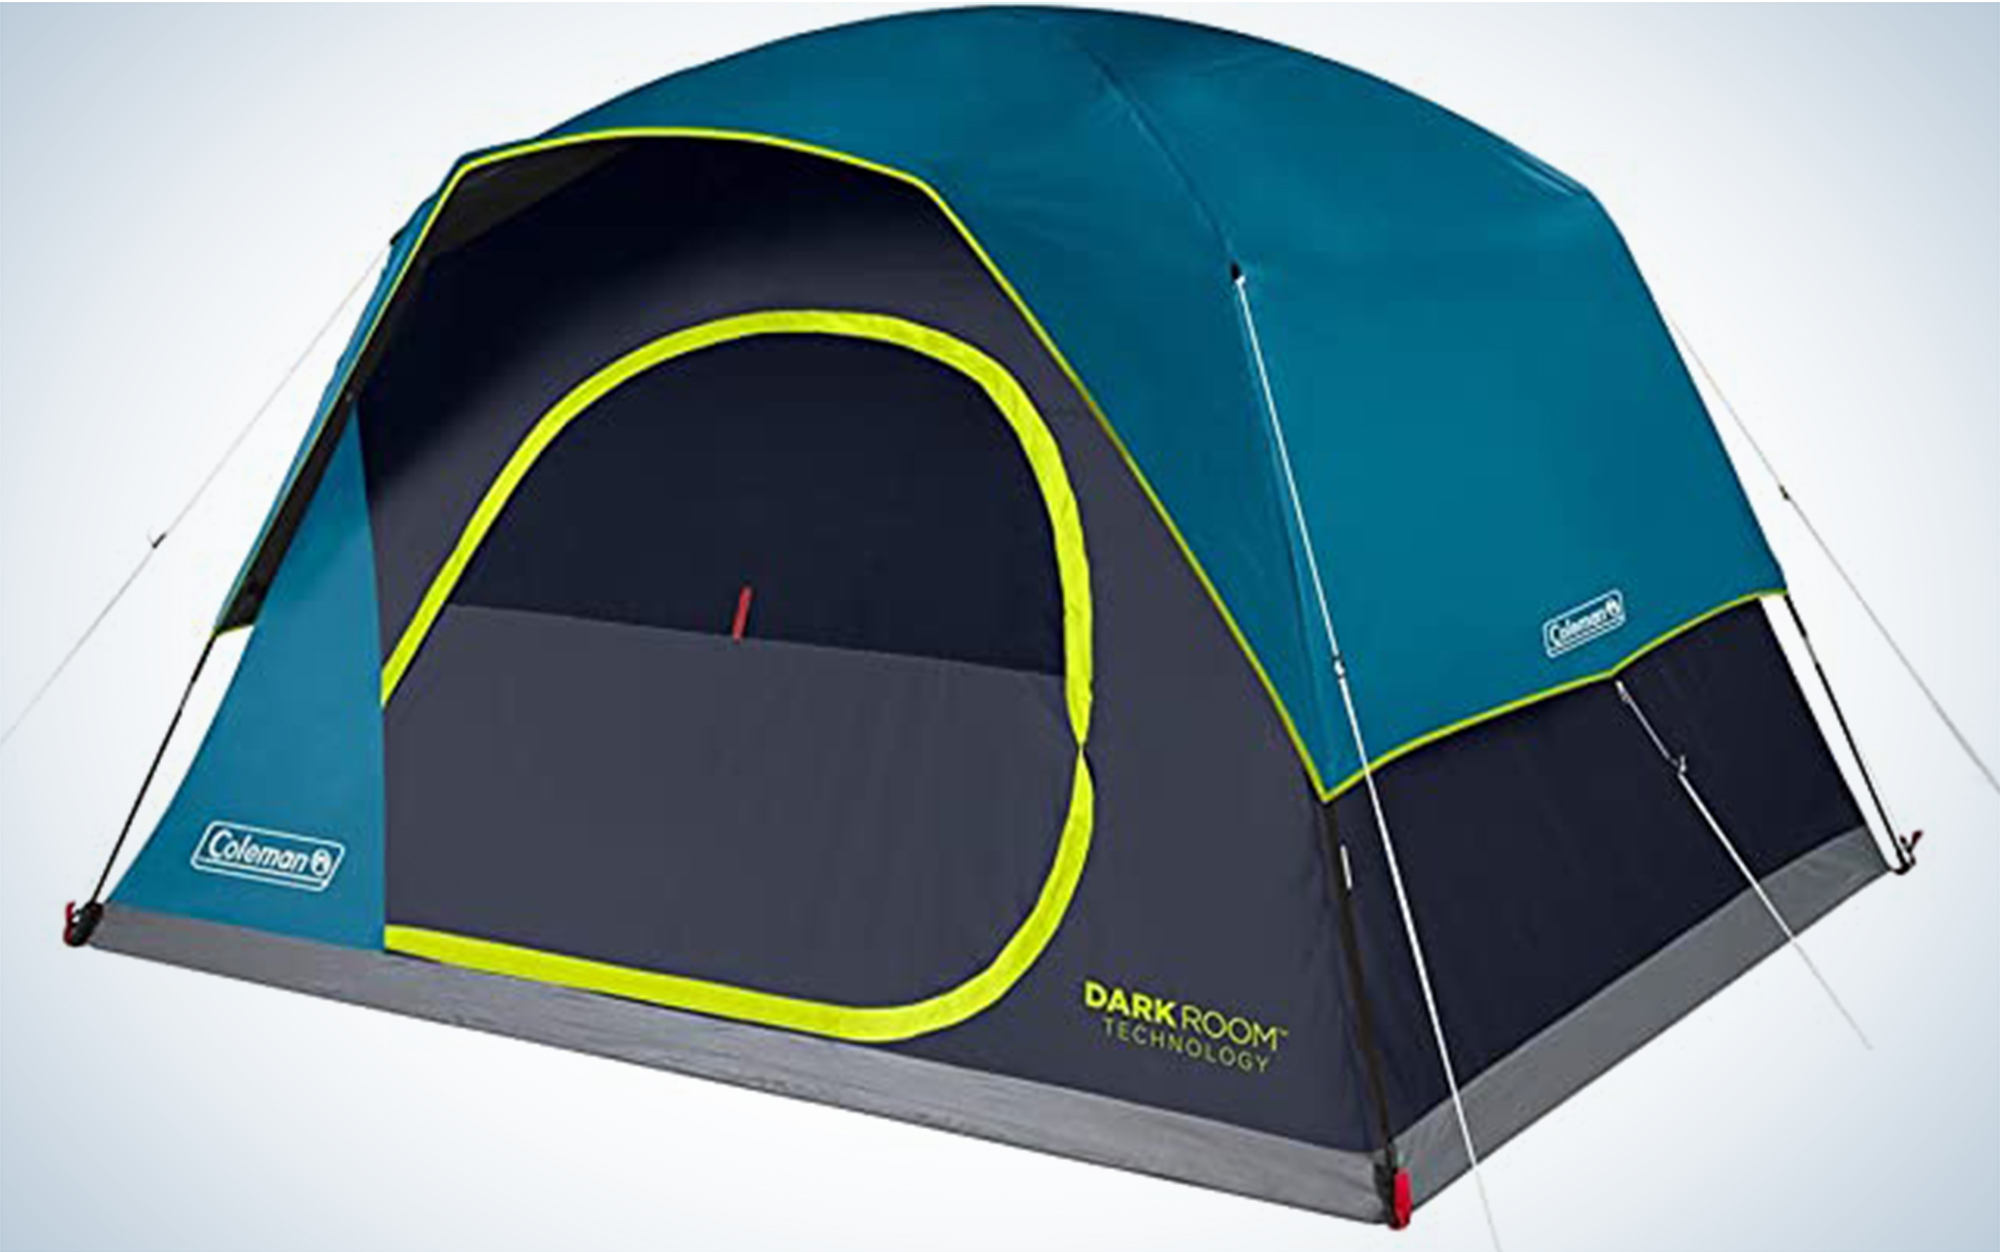 The Coleman Dark Room Skydome is one of the best camping tents.